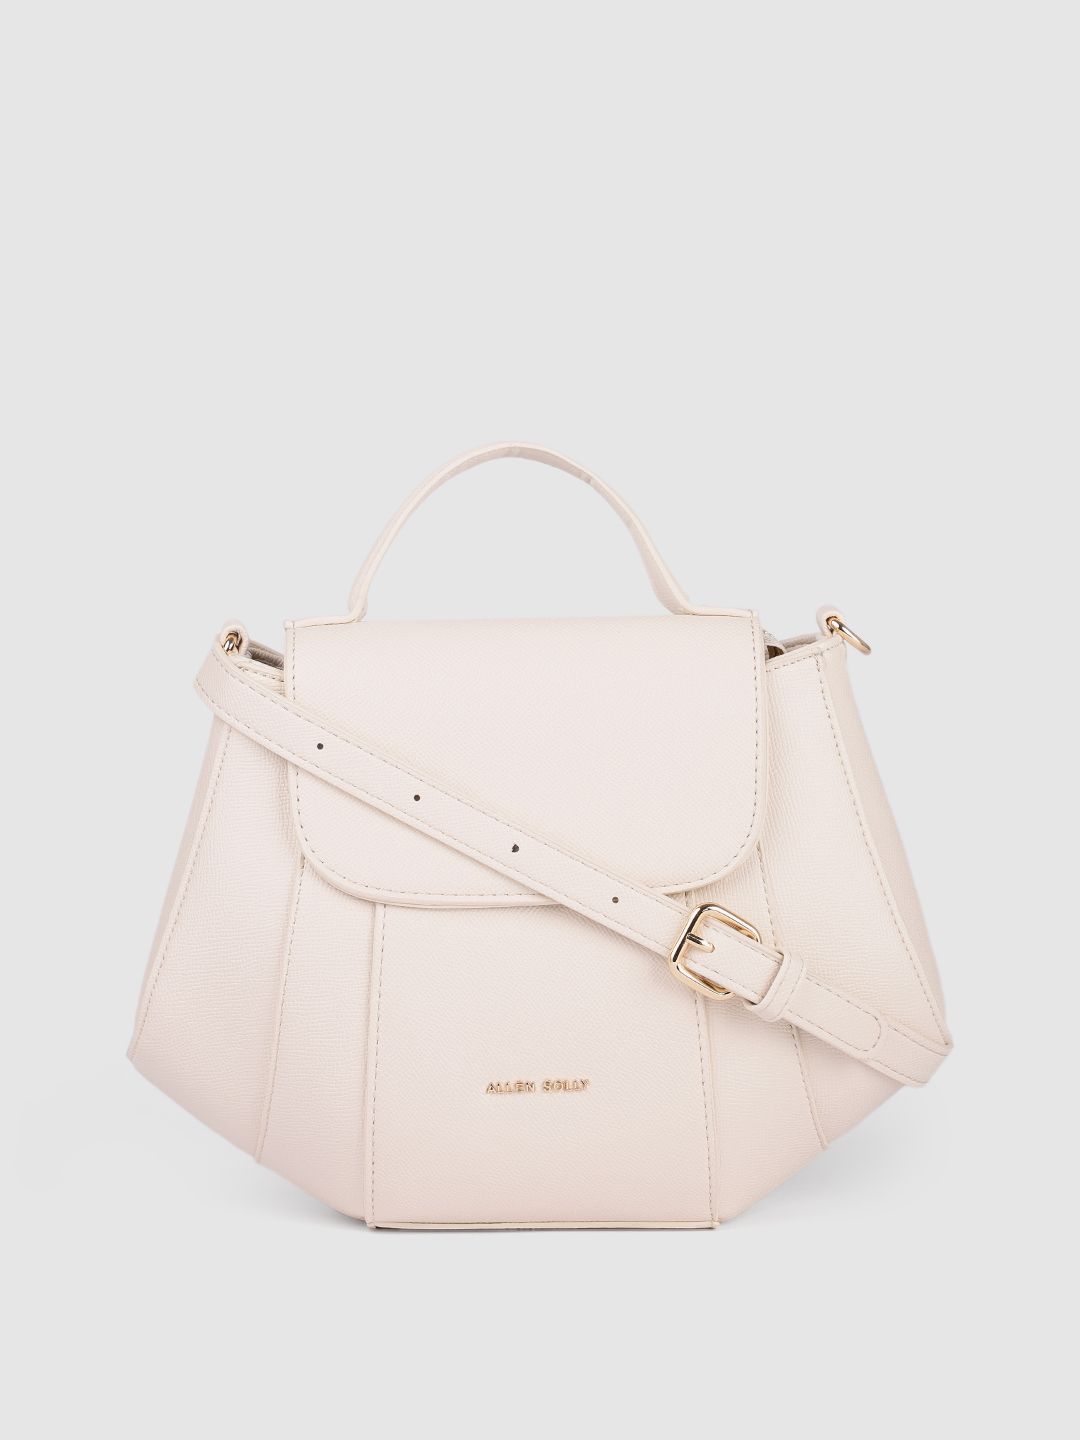 Allen Solly Nude-Coloured Textured Structured Satchel Price in India